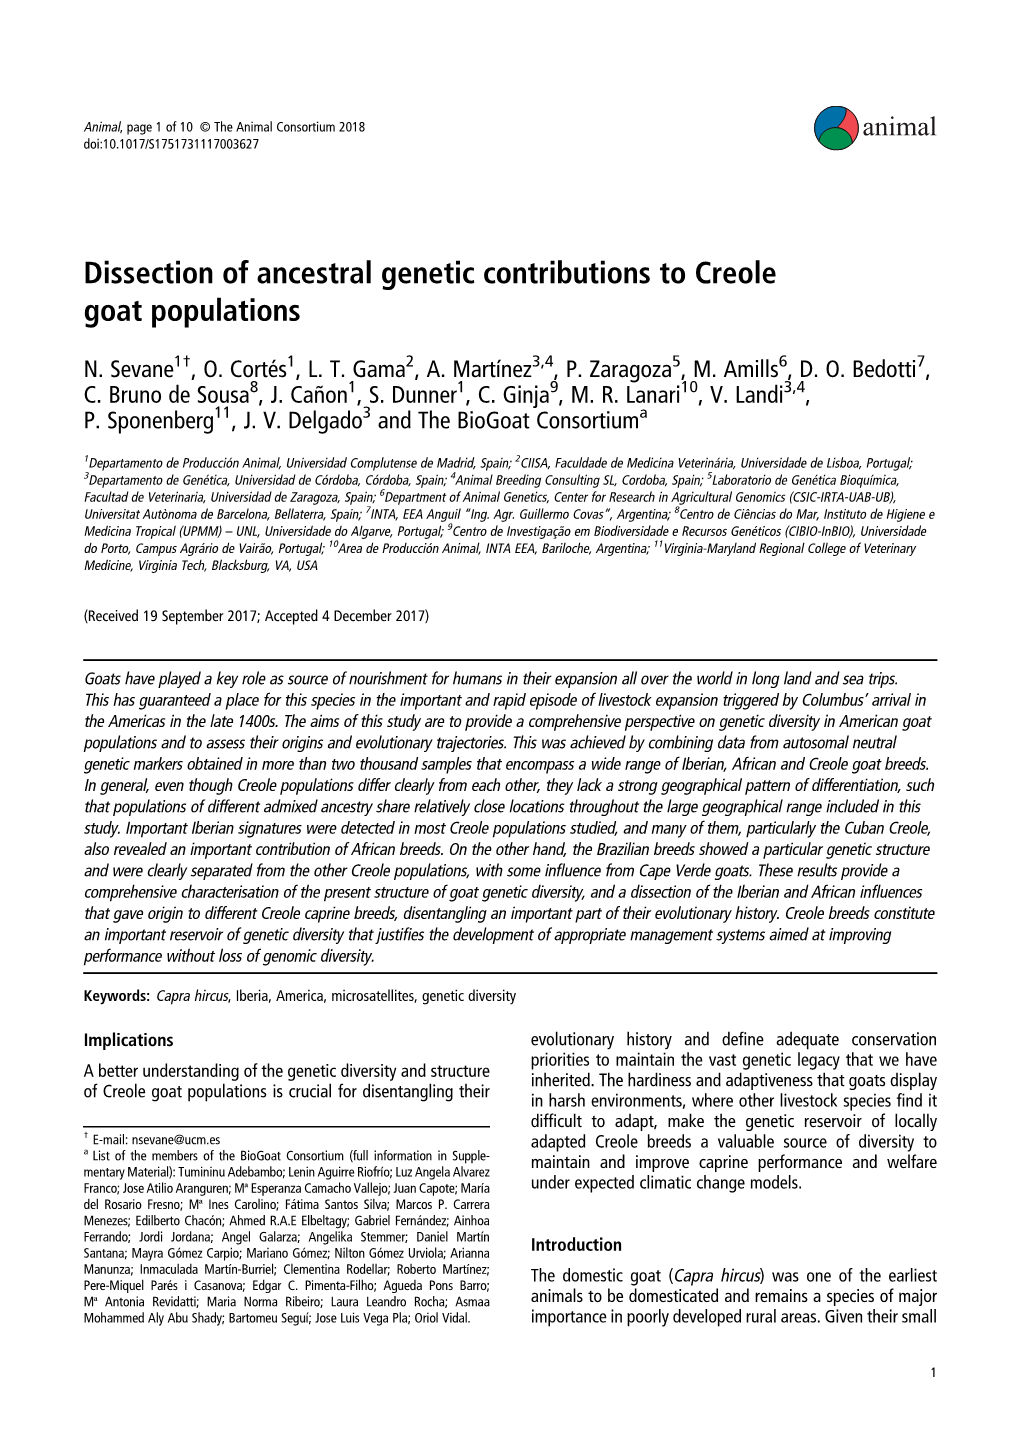 Dissection of Ancestral Genetic Contributions to Creole Goat Populations